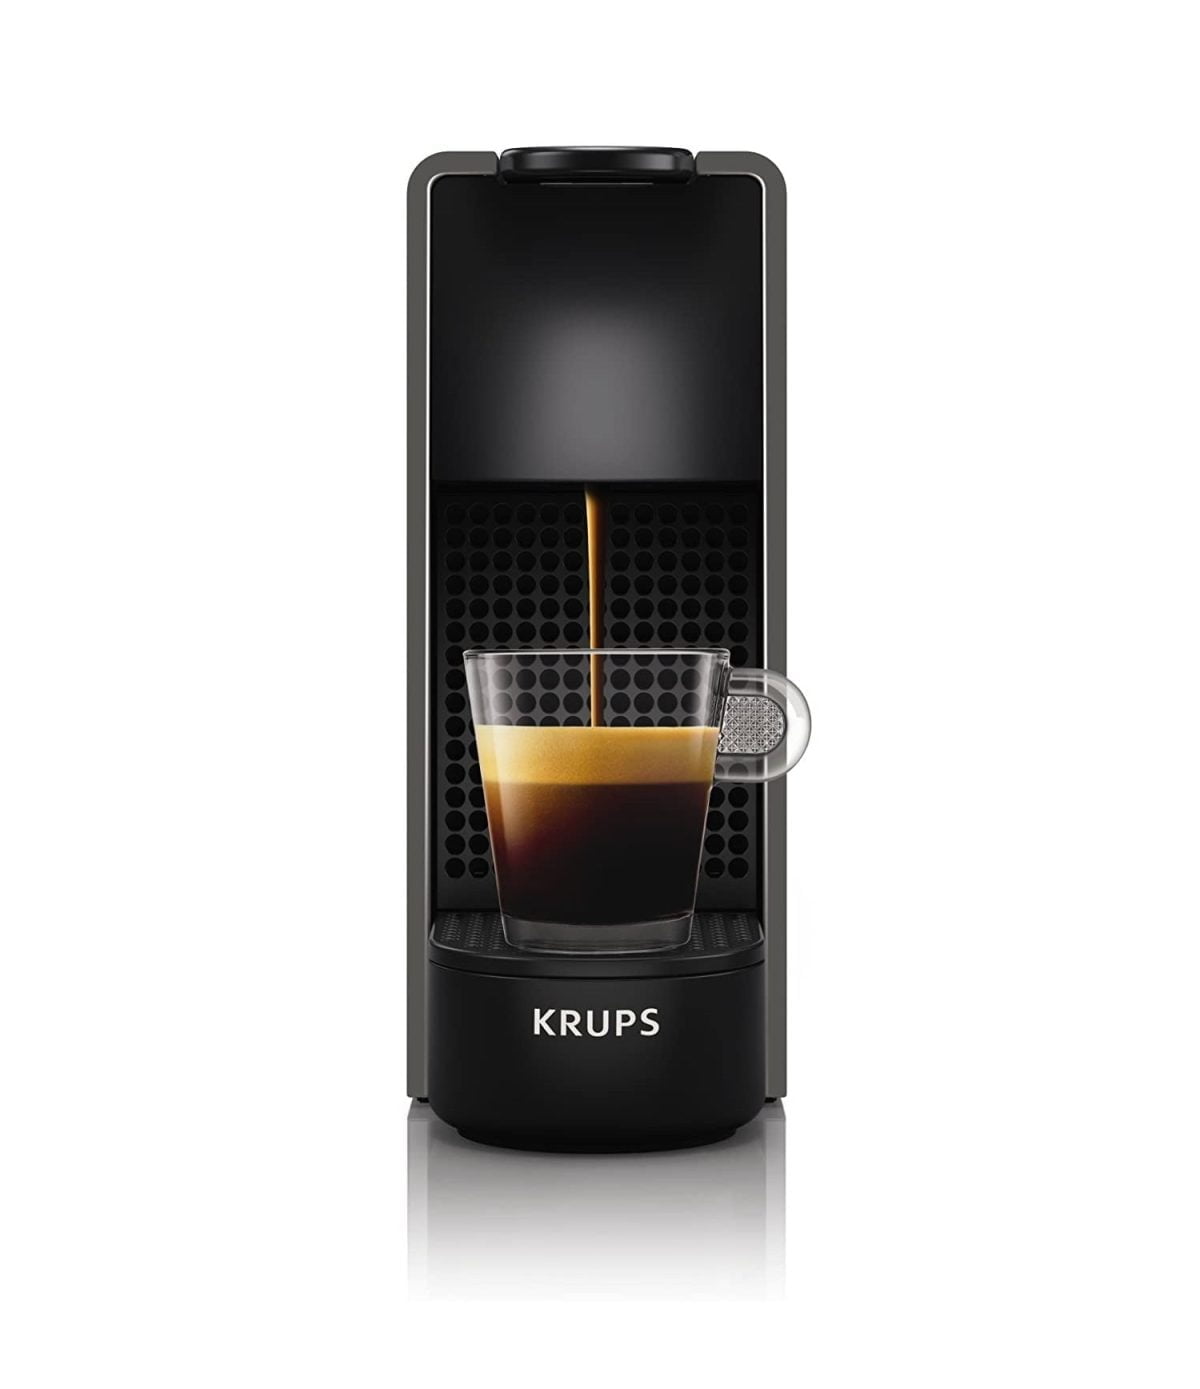 71Yurq5Fdyl. Ac Sl1500 Nespresso &Amp;Lt;H1&Amp;Gt;Nespresso By Krups Essenza Mini Xn110B40 Coffee Machine - Grey&Amp;Lt;/H1&Amp;Gt; &Amp;Lt;Ul Class=&Amp;Quot;A-Unordered-List A-Vertical A-Spacing-Mini&Amp;Quot;&Amp;Gt; &Amp;Lt;Li&Amp;Gt;&Amp;Lt;Span Class=&Amp;Quot;A-List-Item&Amp;Quot;&Amp;Gt; Ultra-Compact Design: Very Small Footprint 33 Cm X 8.4 Cm X 20.4 Cm (L X W X H), Easy To Place And Move In The Kitchen/House &Amp;Lt;/Span&Amp;Gt;&Amp;Lt;/Li&Amp;Gt; &Amp;Lt;Li&Amp;Gt;&Amp;Lt;Span Class=&Amp;Quot;A-List-Item&Amp;Quot;&Amp;Gt; Easy Controls: Two Programmable Options For Espresso Or Lungo With Automatic Flow-Stop &Amp;Lt;/Span&Amp;Gt;&Amp;Lt;/Li&Amp;Gt; &Amp;Lt;Li&Amp;Gt;&Amp;Lt;Span Class=&Amp;Quot;A-List-Item&Amp;Quot;&Amp;Gt; High-Tech: 19-Bar High-Performance Pump And Fast Heat-Up In Only 25 Seconds &Amp;Lt;/Span&Amp;Gt;&Amp;Lt;/Li&Amp;Gt; &Amp;Lt;Li&Amp;Gt;&Amp;Lt;Span Class=&Amp;Quot;A-List-Item&Amp;Quot;&Amp;Gt; Thermoblock Technology - The Process Which Heats The Water As Required, Ensuring Fresh Water At The Ideal Temperature Whilst Reducing The Chance Of Scaling &Amp;Lt;/Span&Amp;Gt;&Amp;Lt;/Li&Amp;Gt; &Amp;Lt;Li&Amp;Gt;&Amp;Lt;Span Class=&Amp;Quot;A-List-Item&Amp;Quot;&Amp;Gt; Energy-Saving: Low Energy Use Mode Auto-Starts After 3 Minutes, With An Automatic Off Function After 9 Minutes&Amp;Lt;/Span&Amp;Gt;&Amp;Lt;/Li&Amp;Gt; &Amp;Lt;/Ul&Amp;Gt; Coffee Machine Nespresso By Krups Essenza Mini Xn110B40 Coffee Machine - Grey